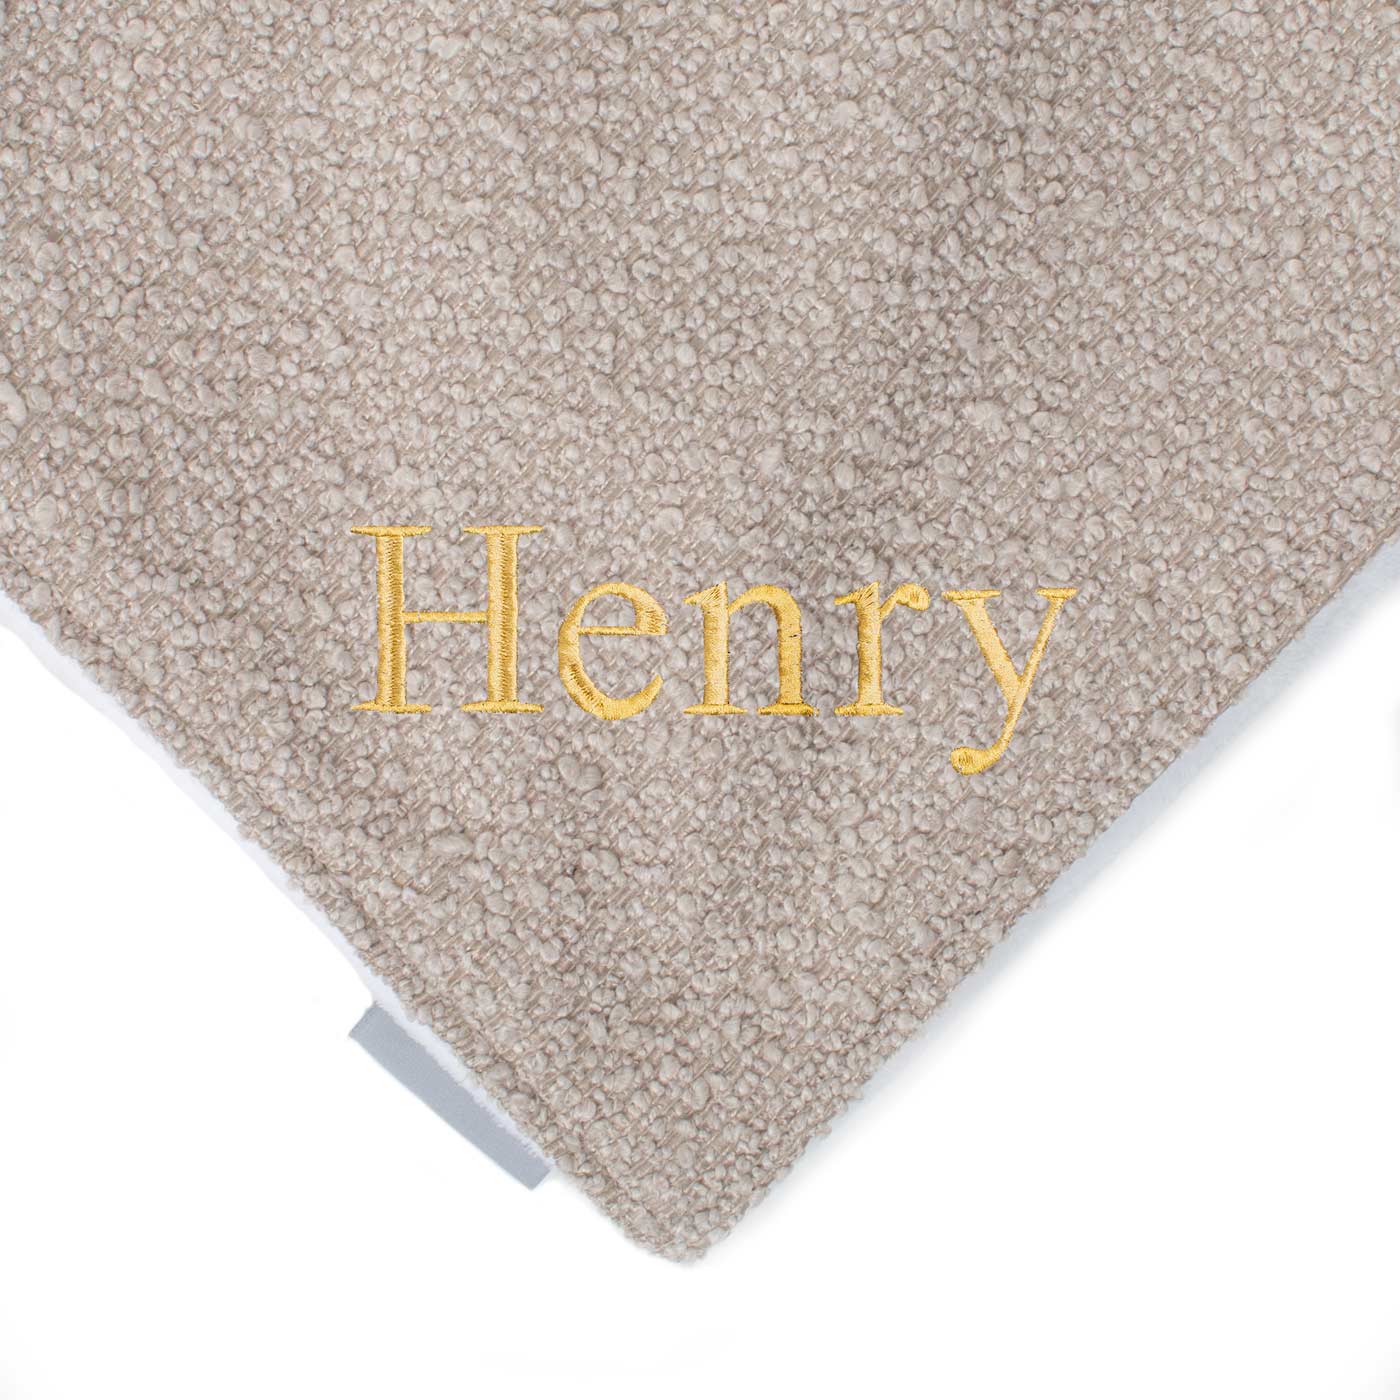 [colour:Mink Boucle]  Super Soft Sherpa & Teddy Fleece Lining, Our Luxury Cat & Kitten Blanket In Stunning Mink Boucle I The Perfect Cat Bed Accessory! Available To Personalise at Lords & Labradors